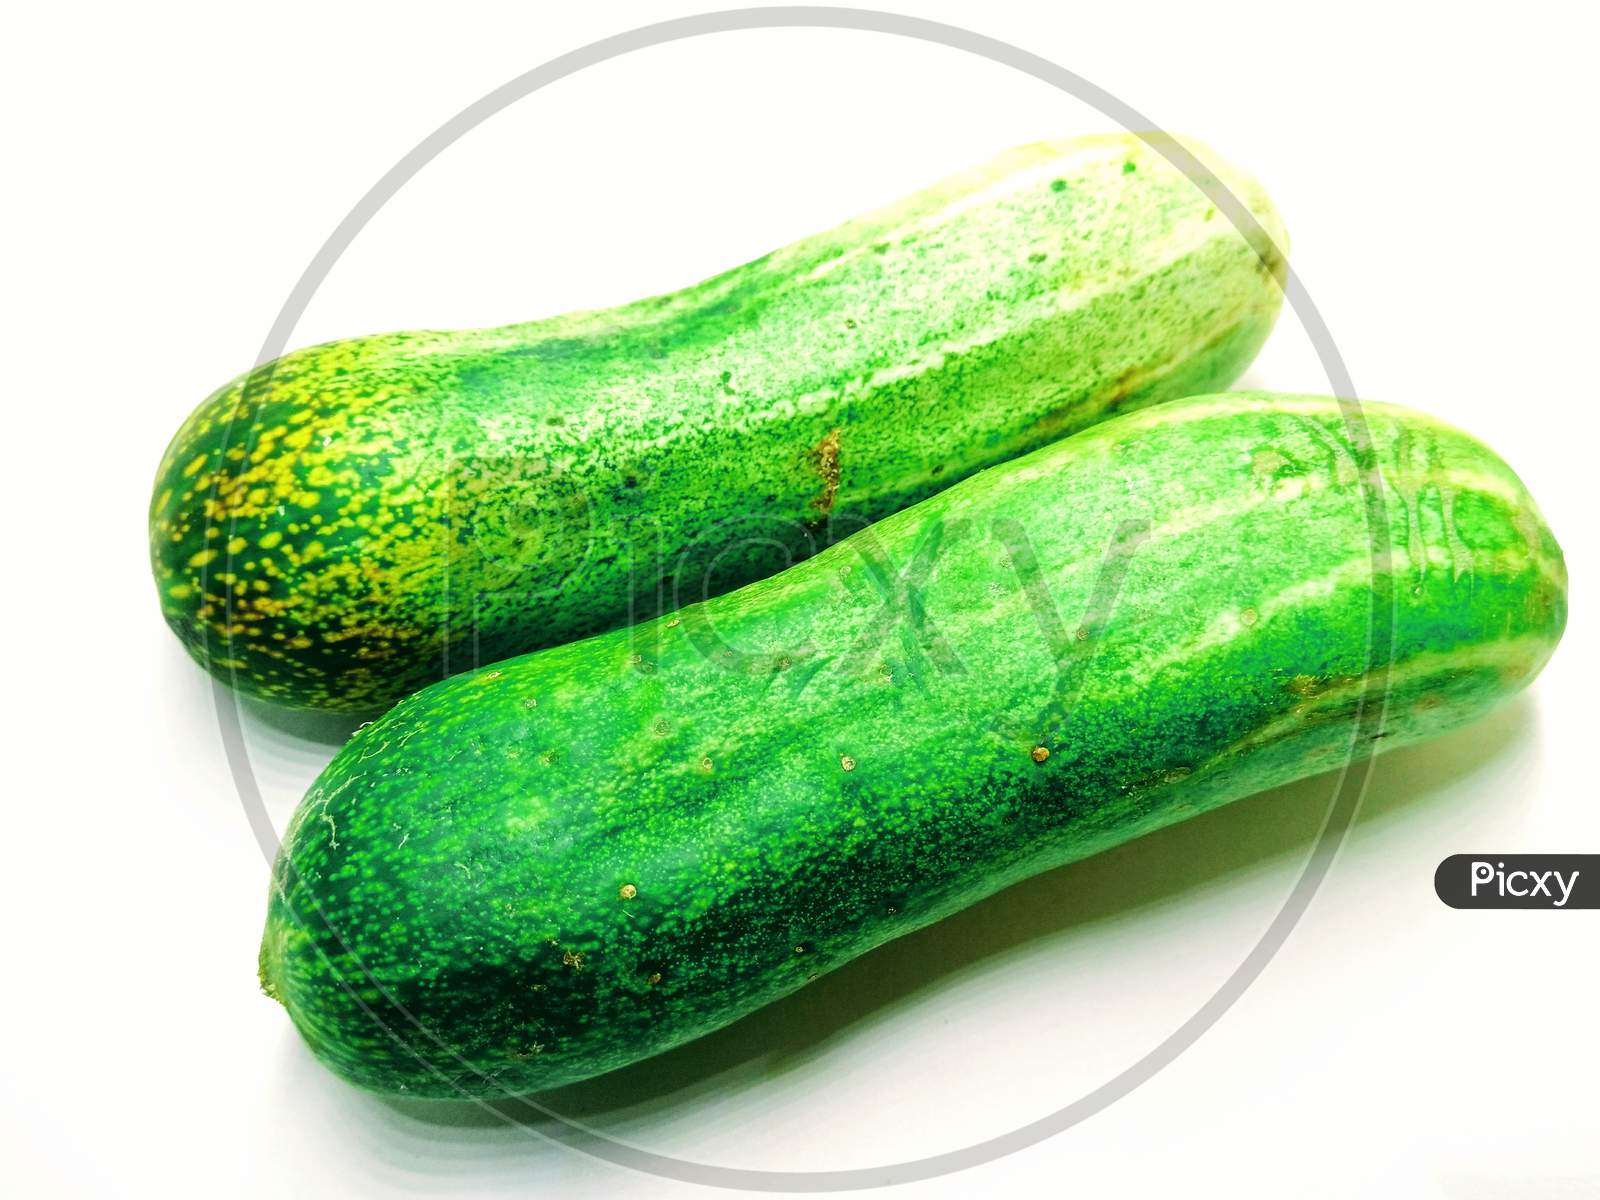 Green Cucumber On Isolated White